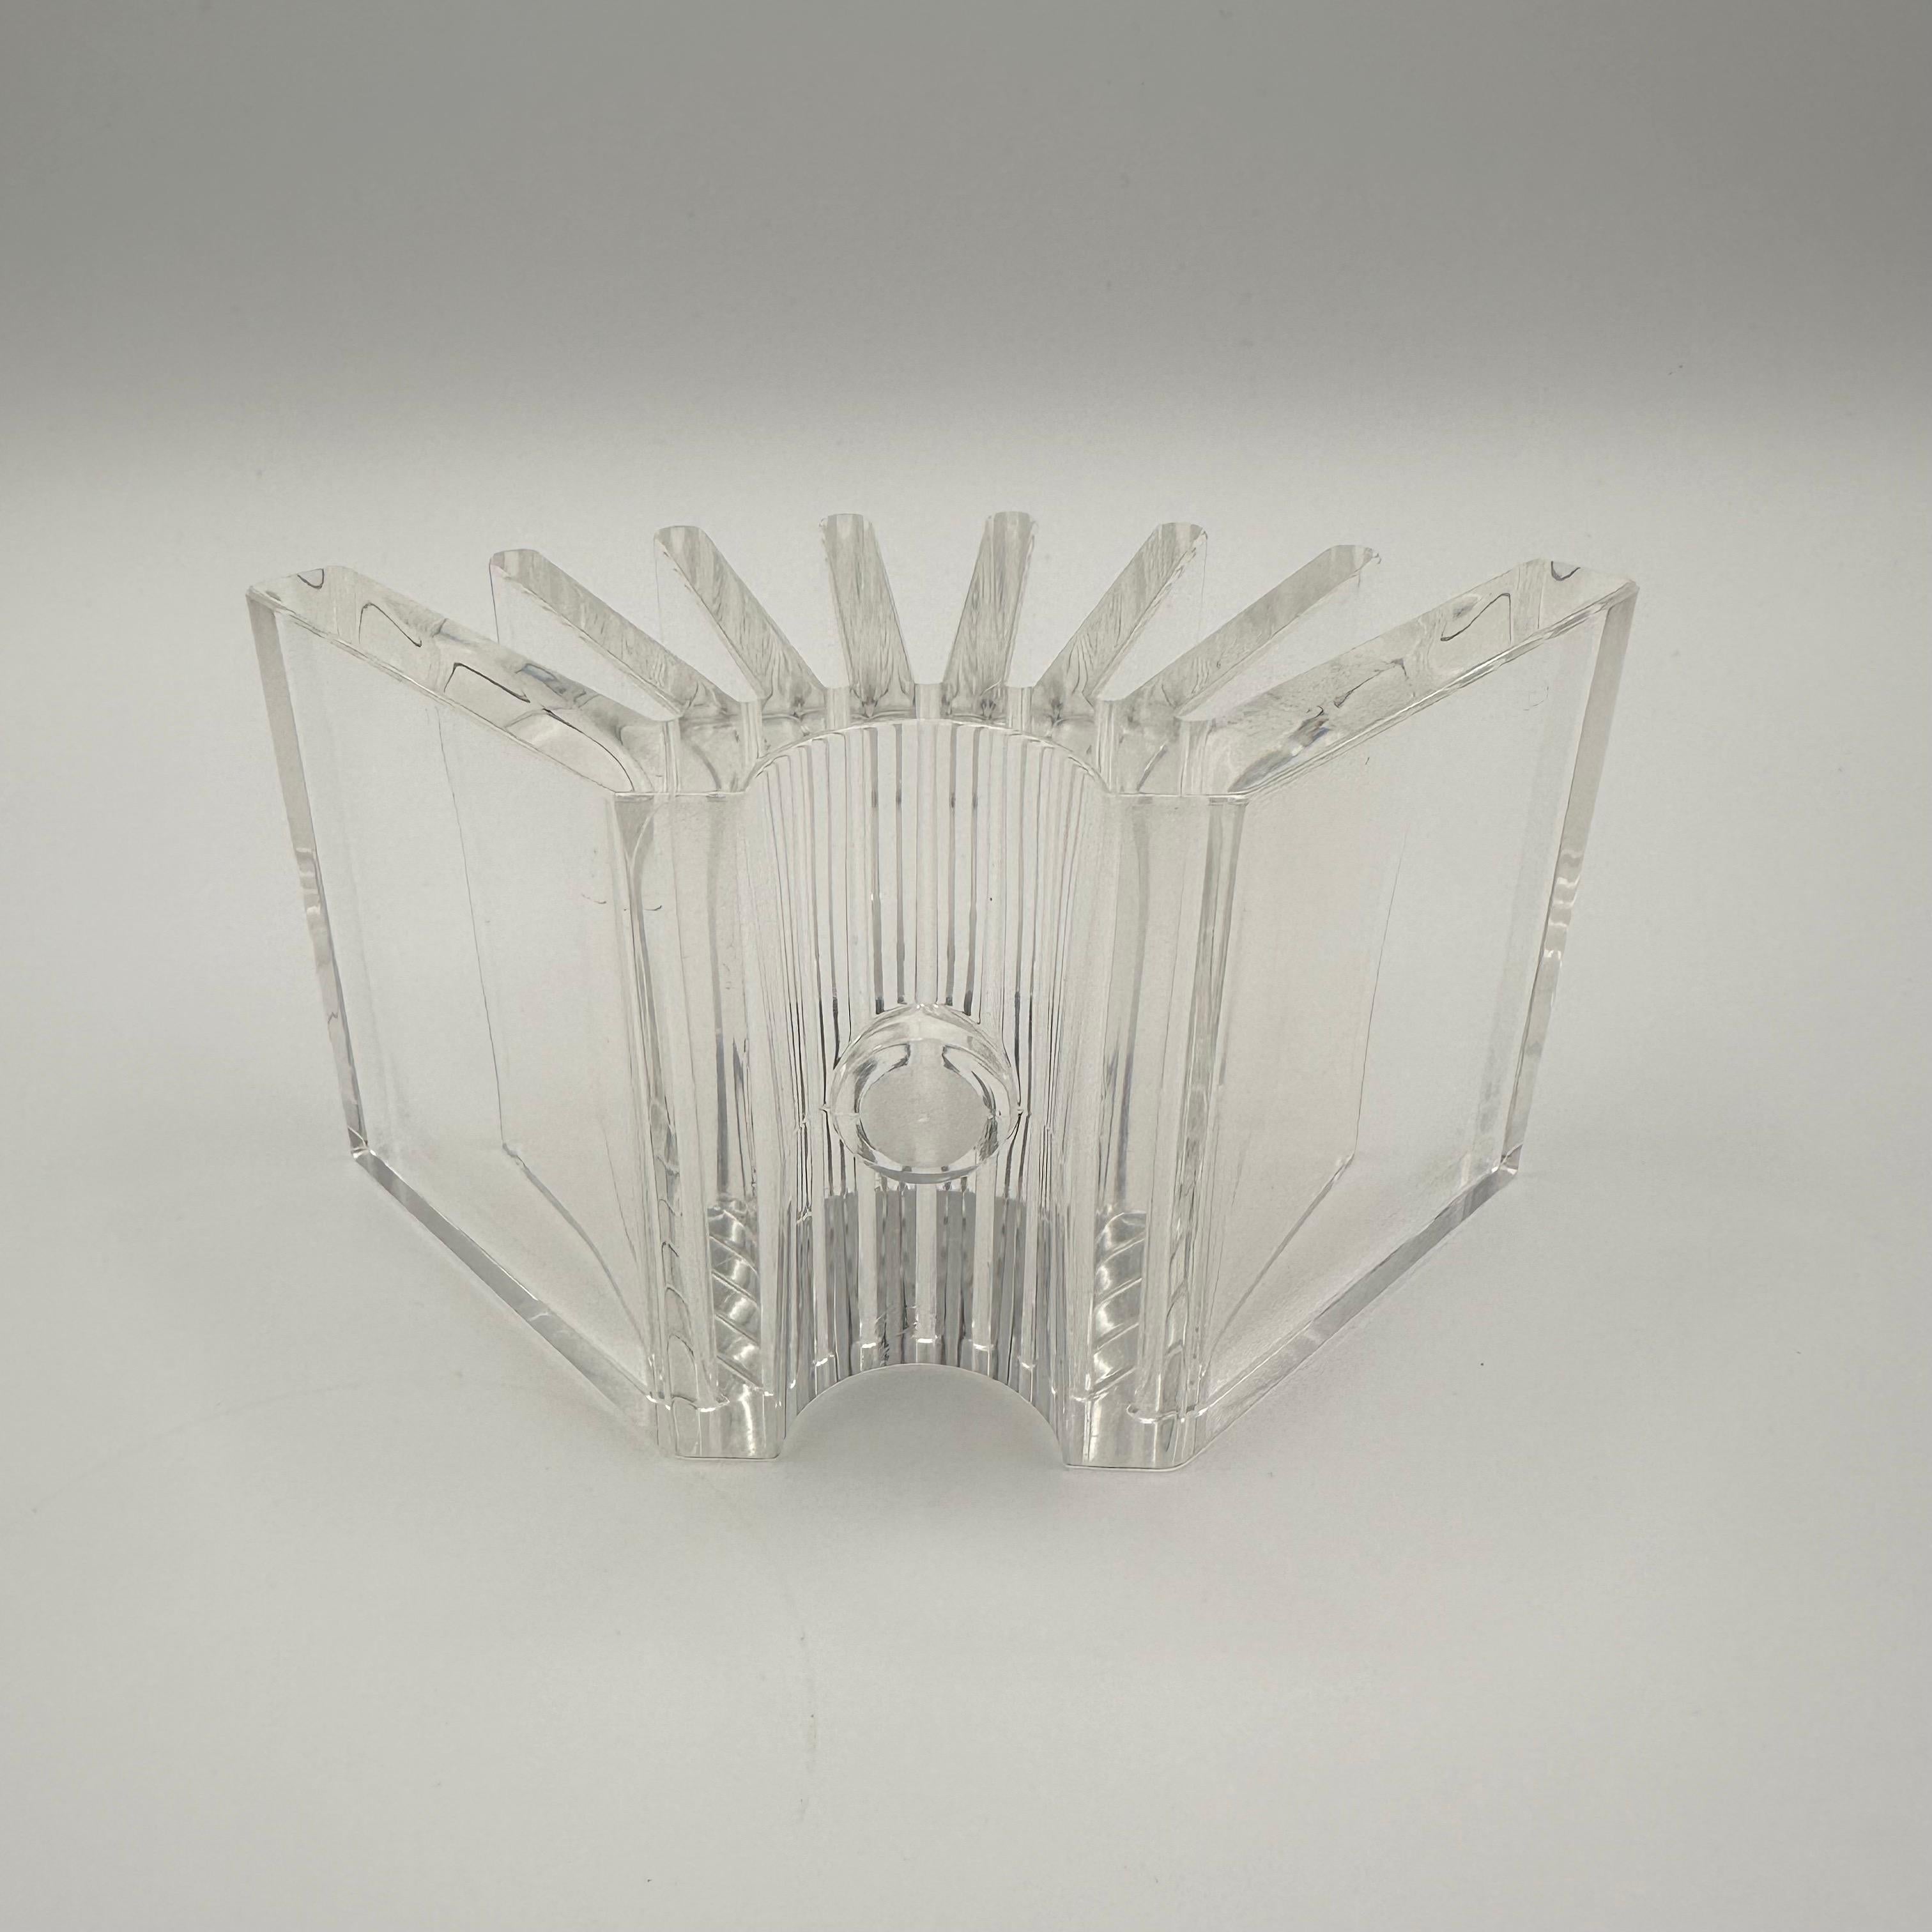 Vintage Clear Lucite Fan Shaped Card Holder by Guzzini 1980s Made in Italy In Good Condition For Sale In Amityville, NY